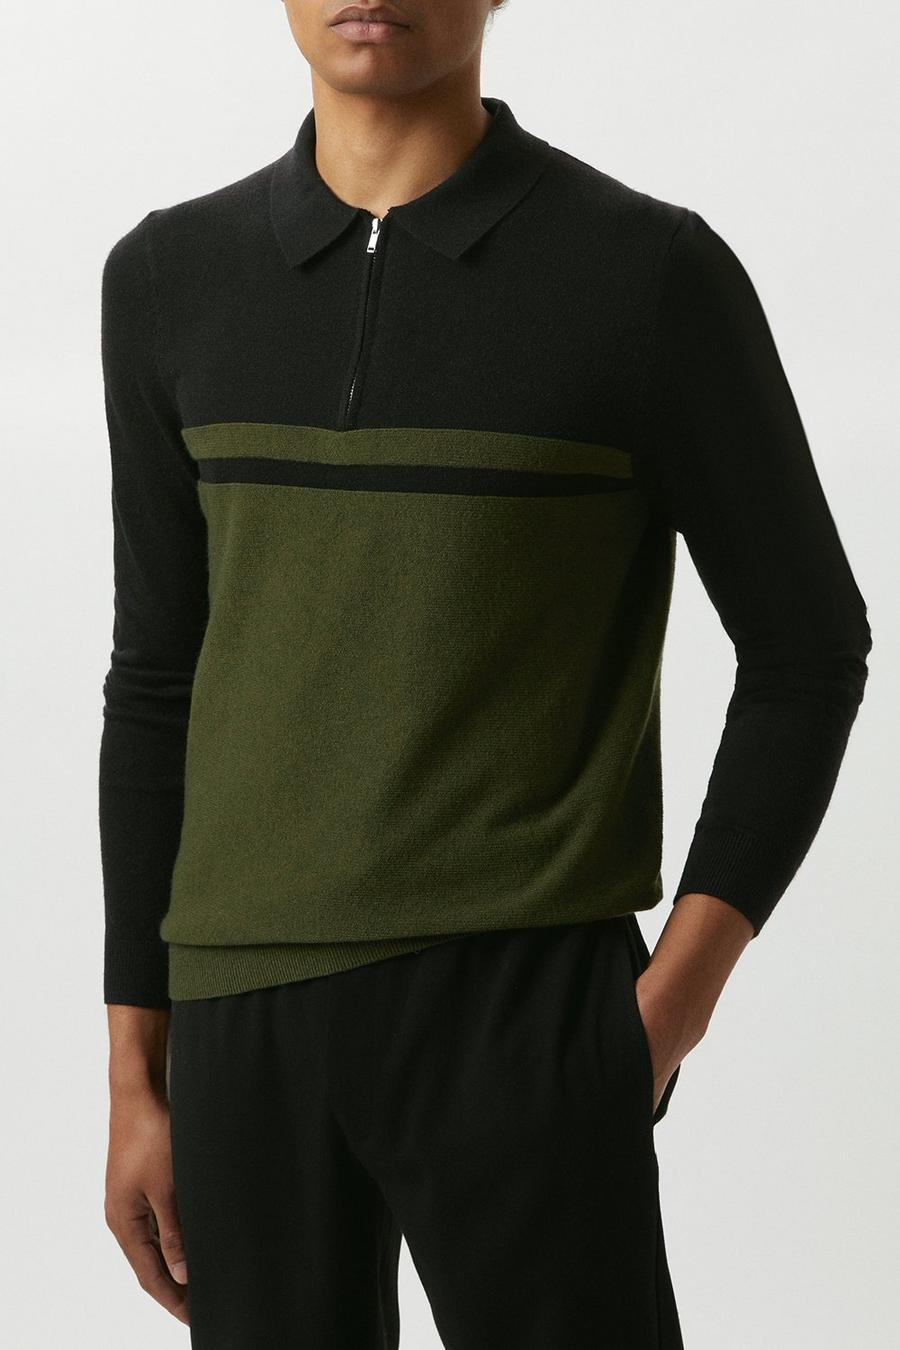 Super Soft Khaki Two Tone Knitted Zip Up Polo Shirt